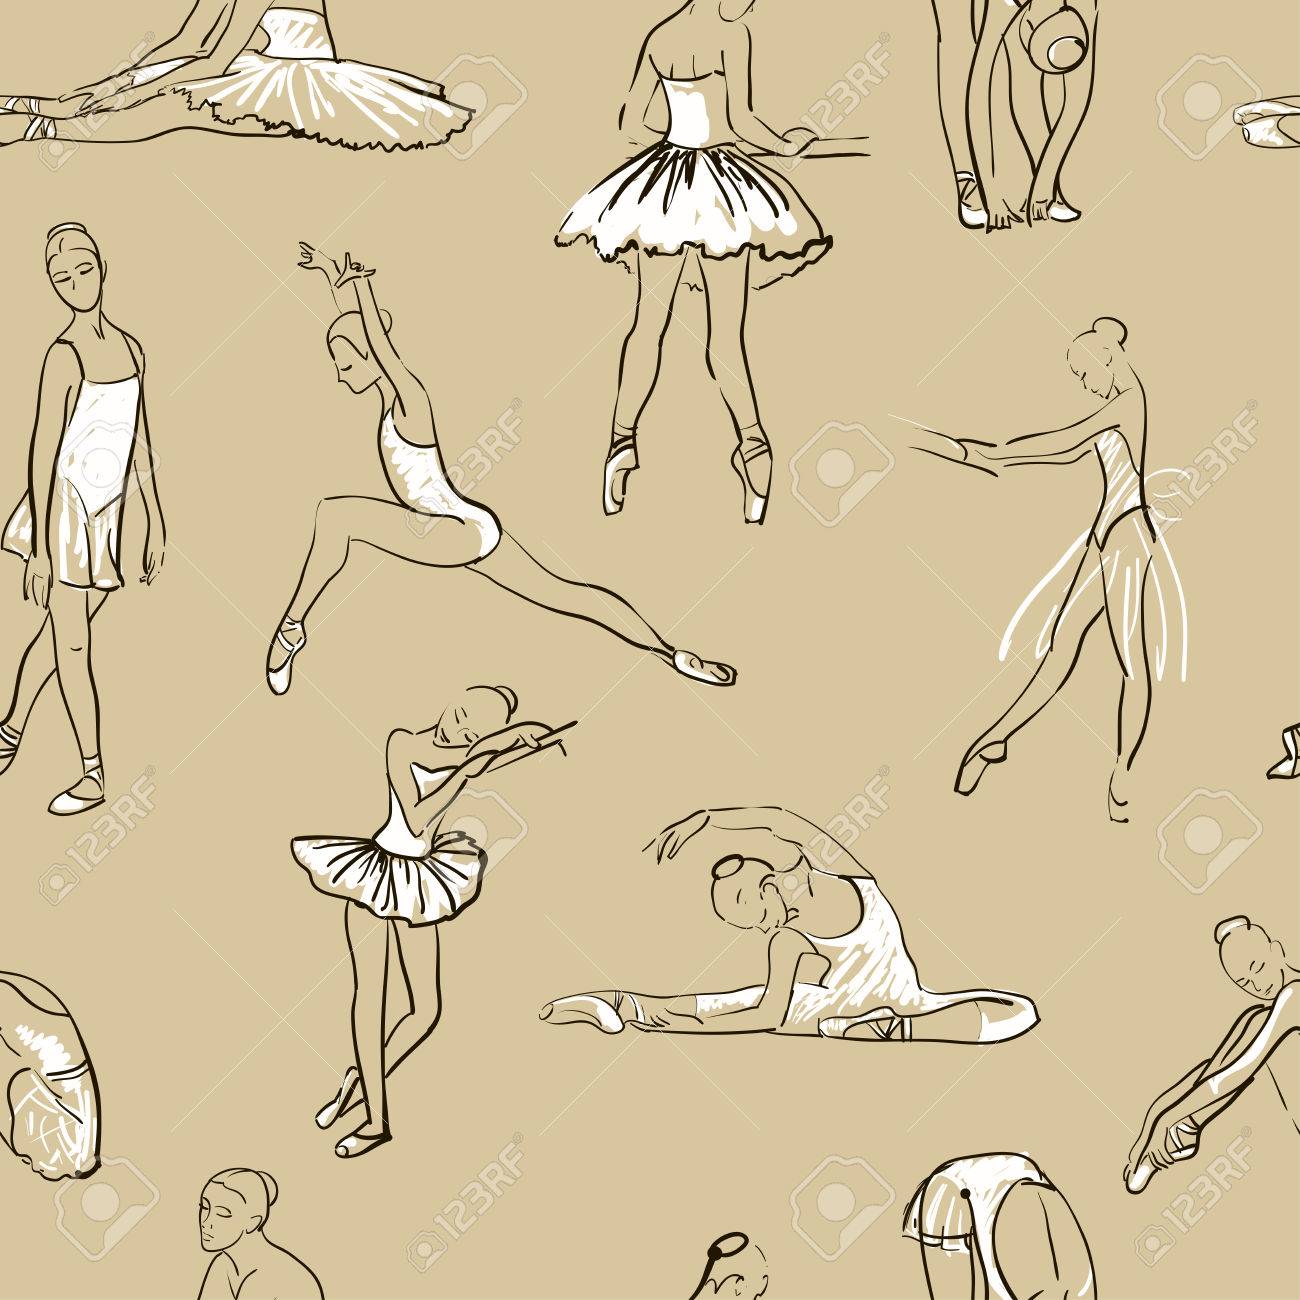 Dancing Reference Ballerina Poses Drawing mylouistomlinsonfanfiction